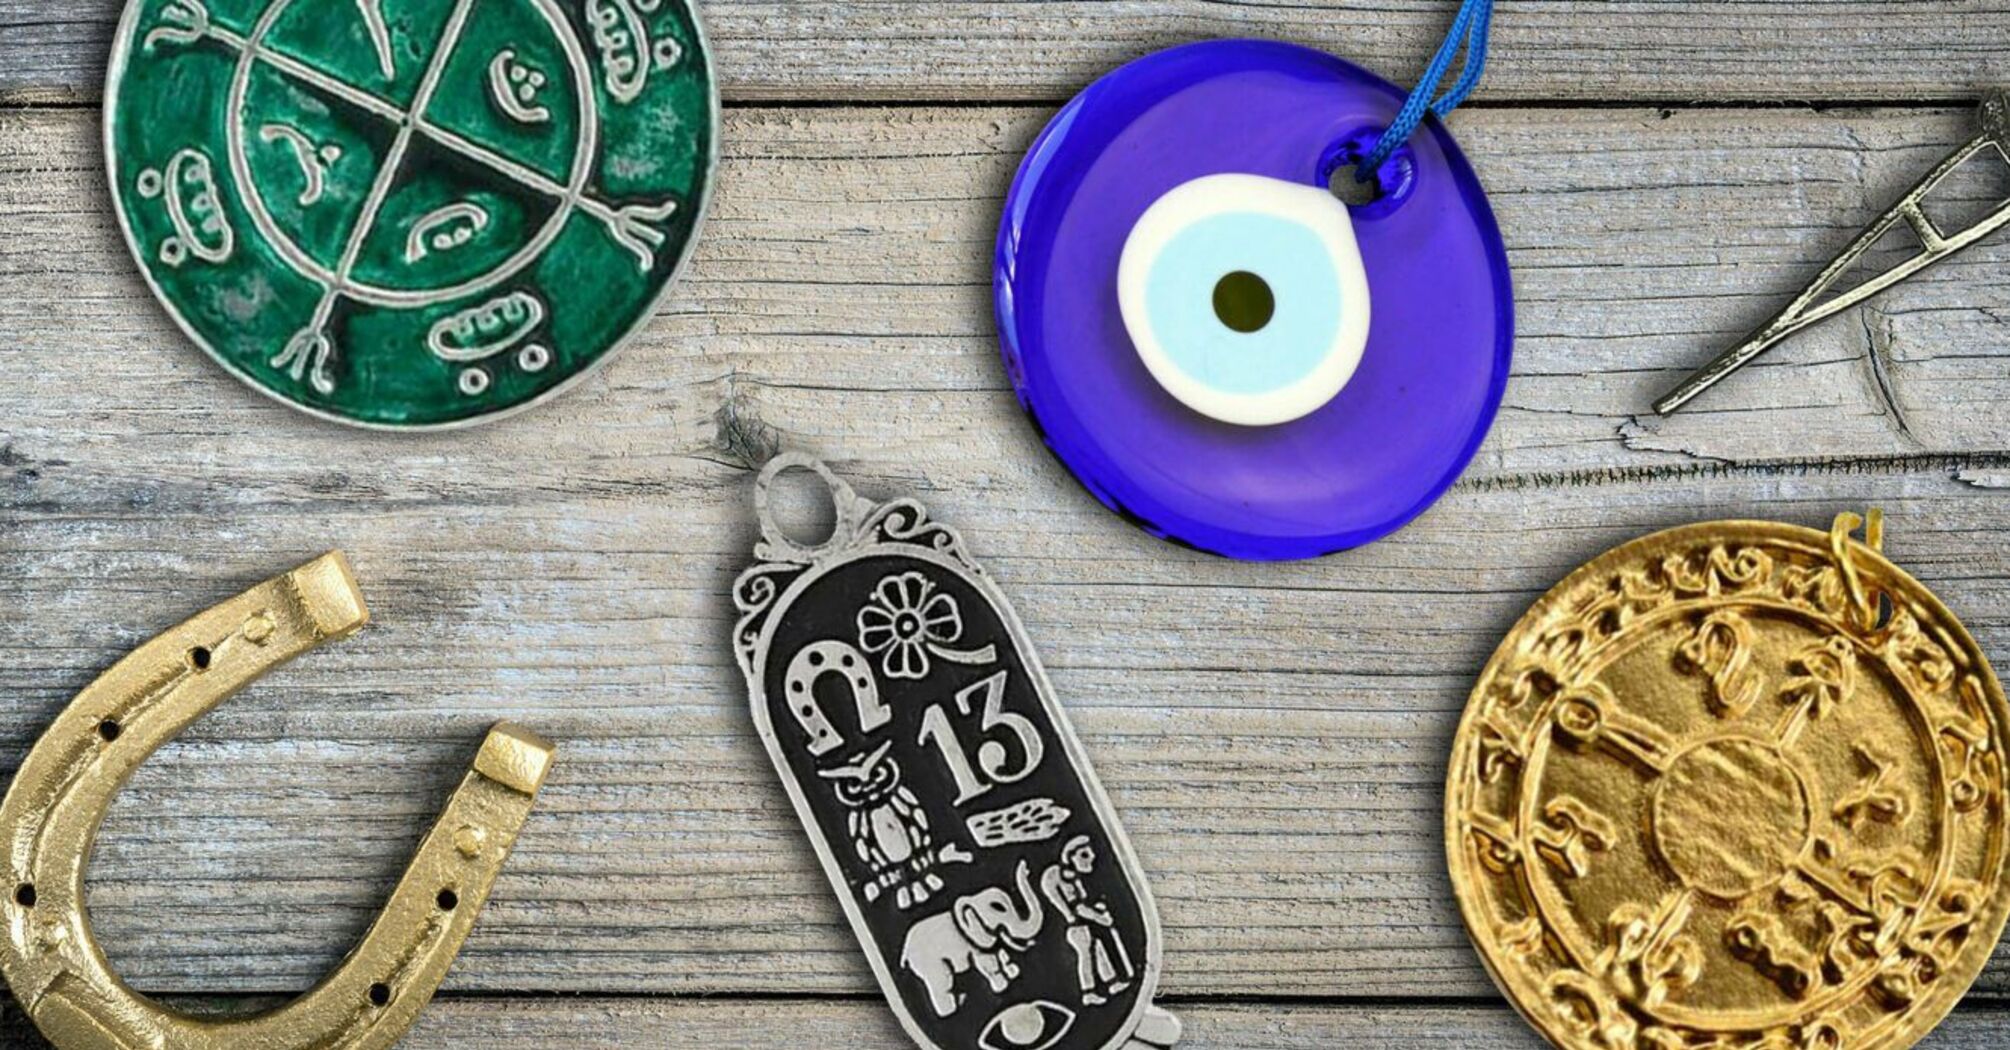 Charms and amulets: signs and superstitions